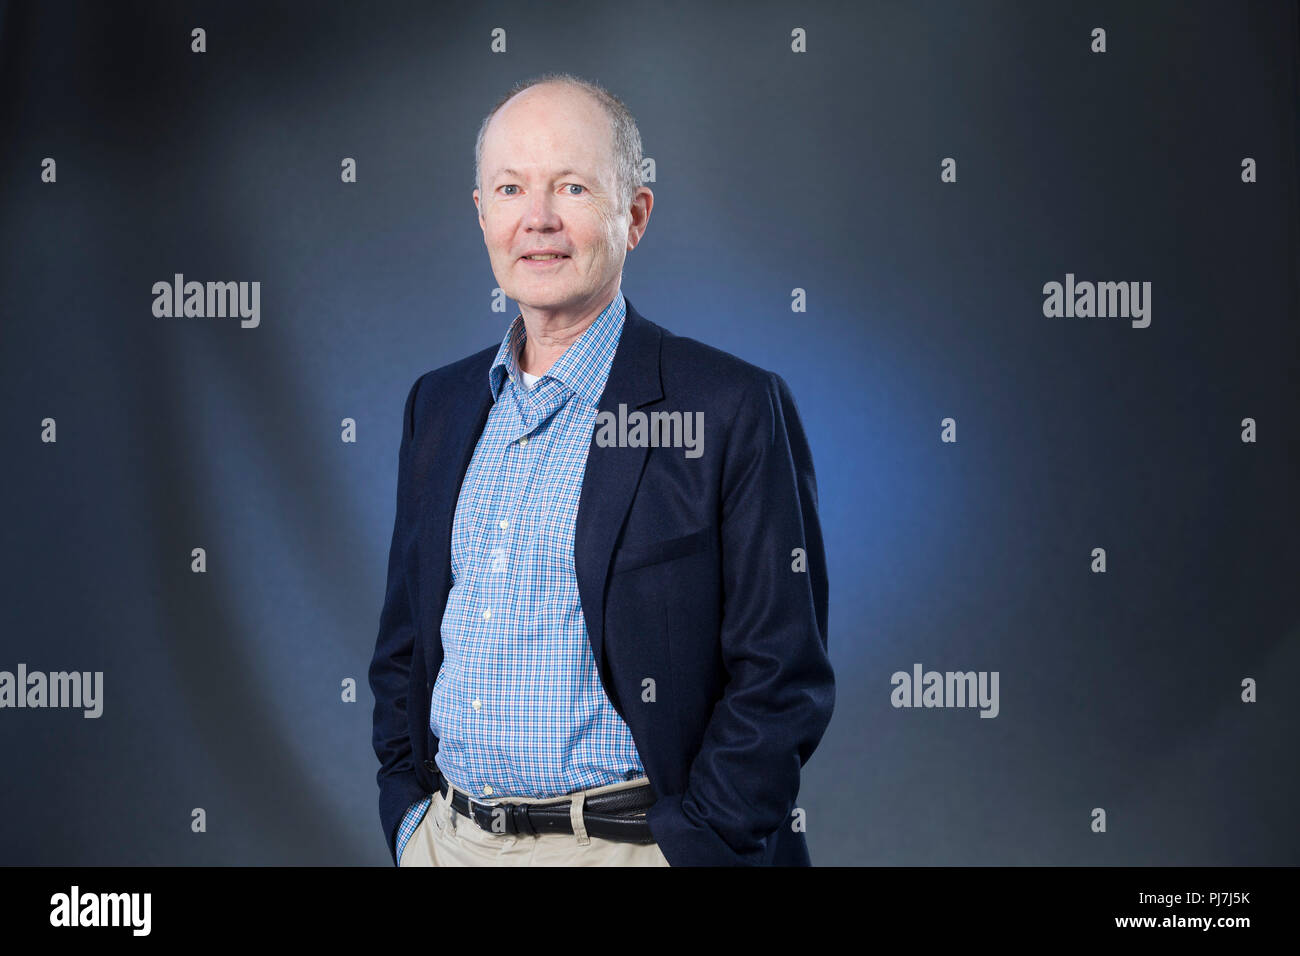 Edinburgh, UK. 22nd August, 2018. James Thornton is an environmental lawyer and writer. He is the founding CEO of ClientEarth, a global non-profit environmental law organisation. Pictured at the Edinburgh International Book Festival. Edinburgh, Scotland.  Picture by Gary Doak / Alamy Live News Stock Photo